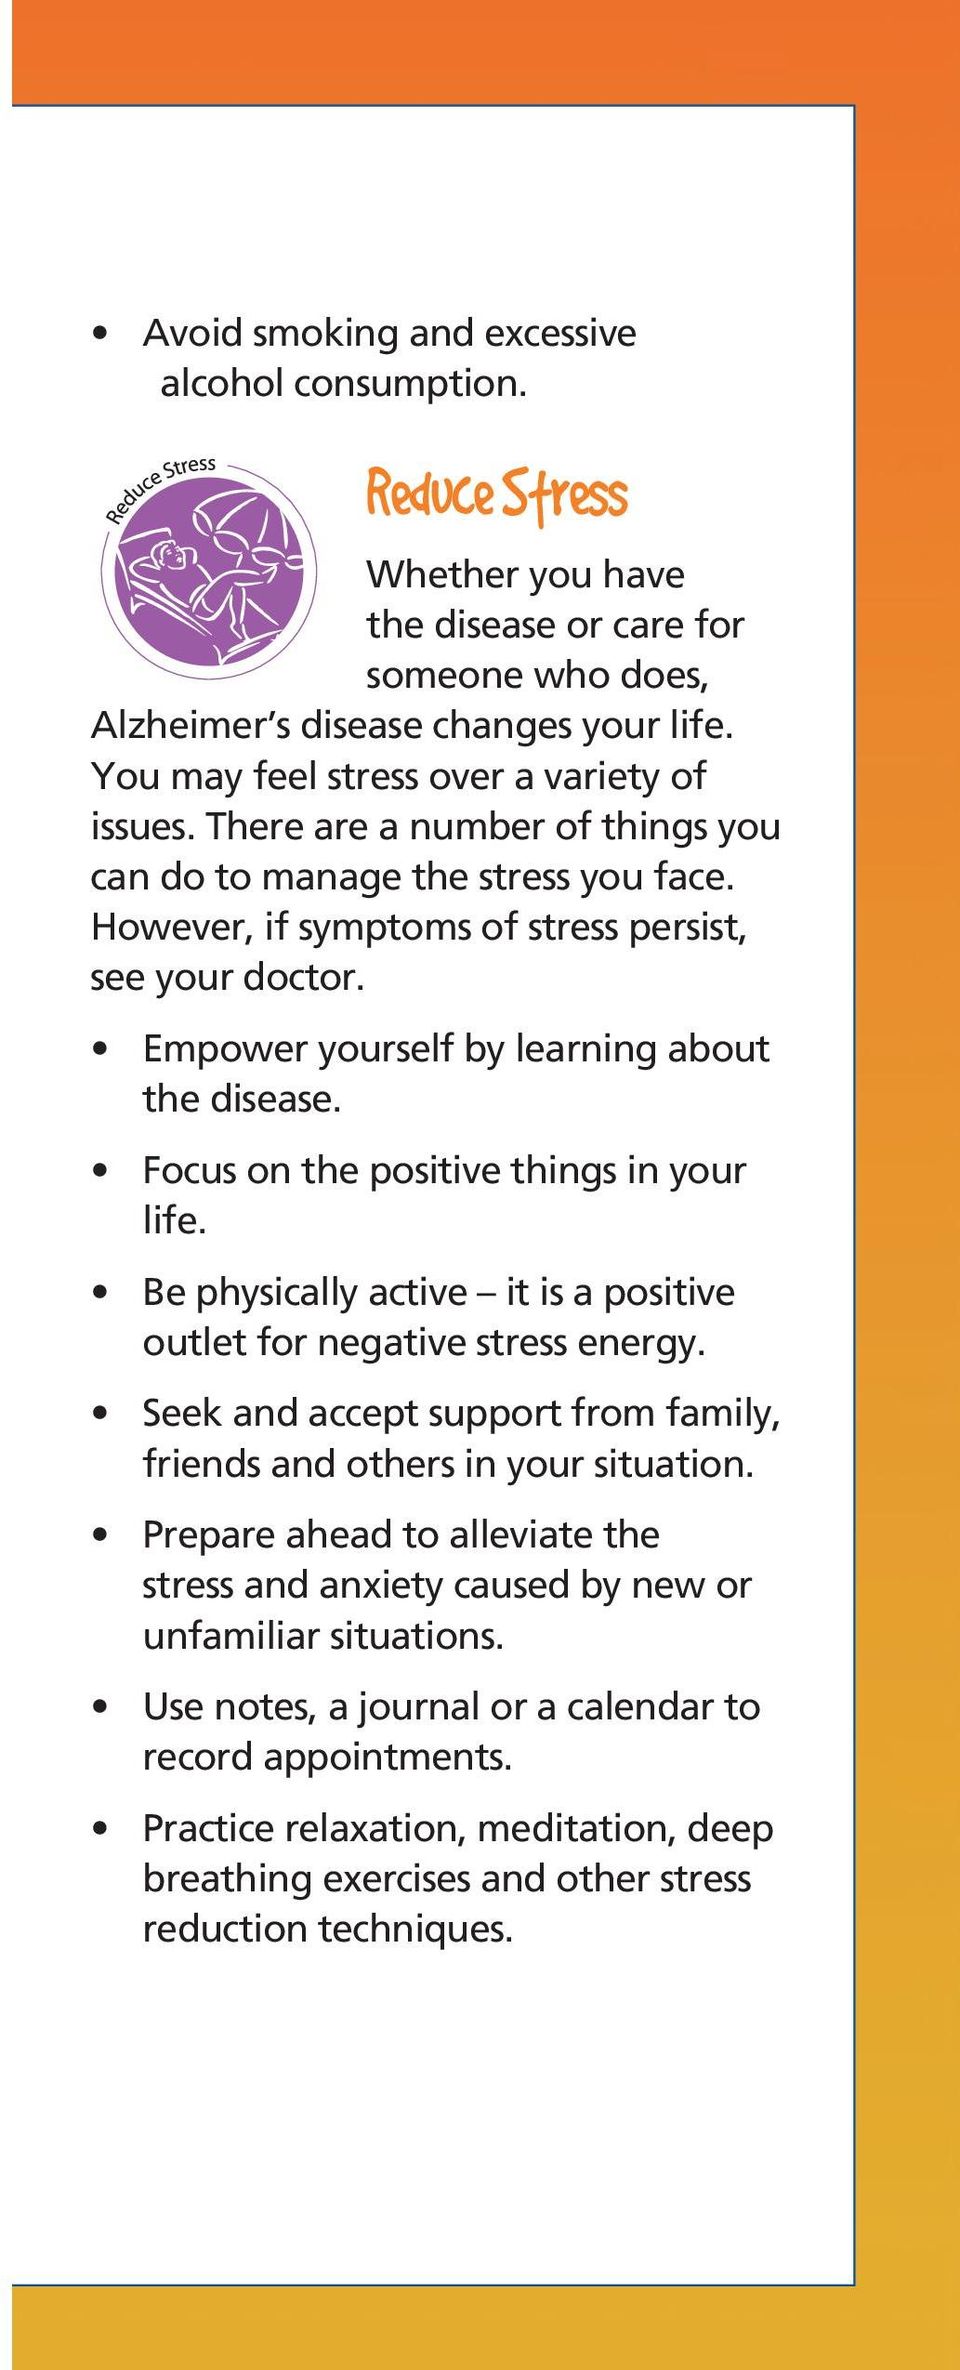 Empower yourself by learning about the disease. Focus on the positive things in your life. Be physically active it is a positive outlet for negative stress energy.